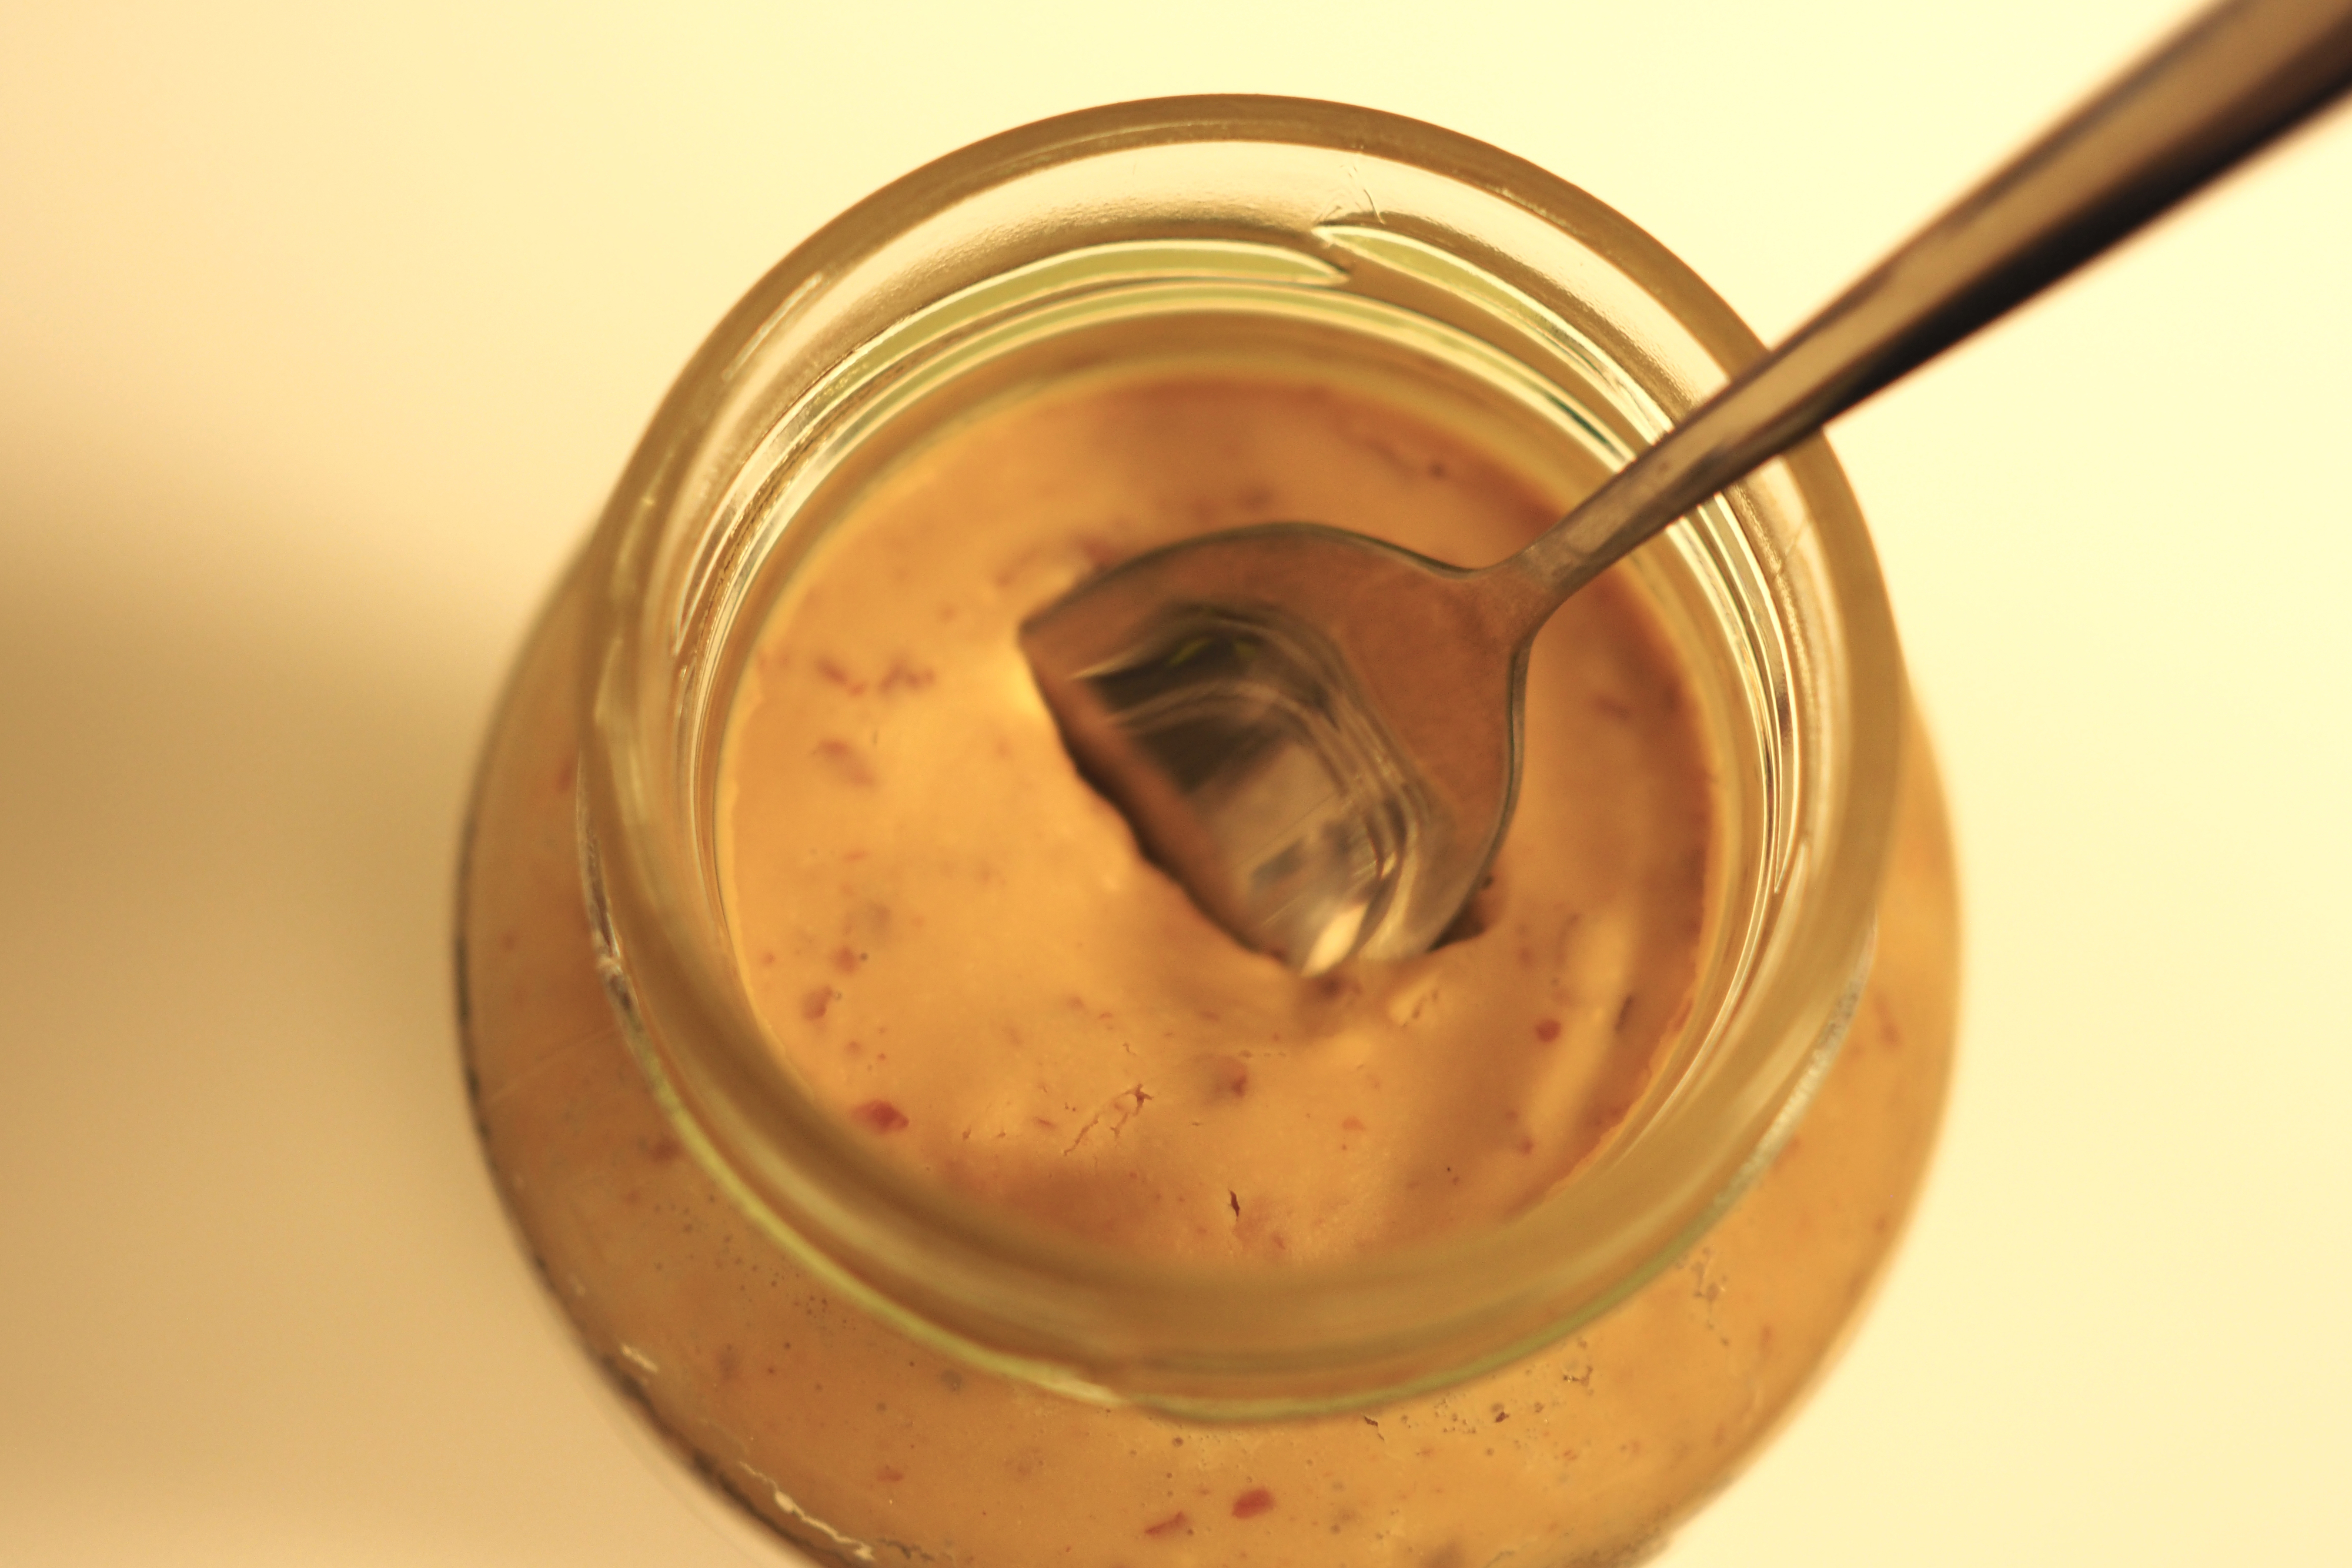 Top view of an open jar of peanut butter with a spoon inside